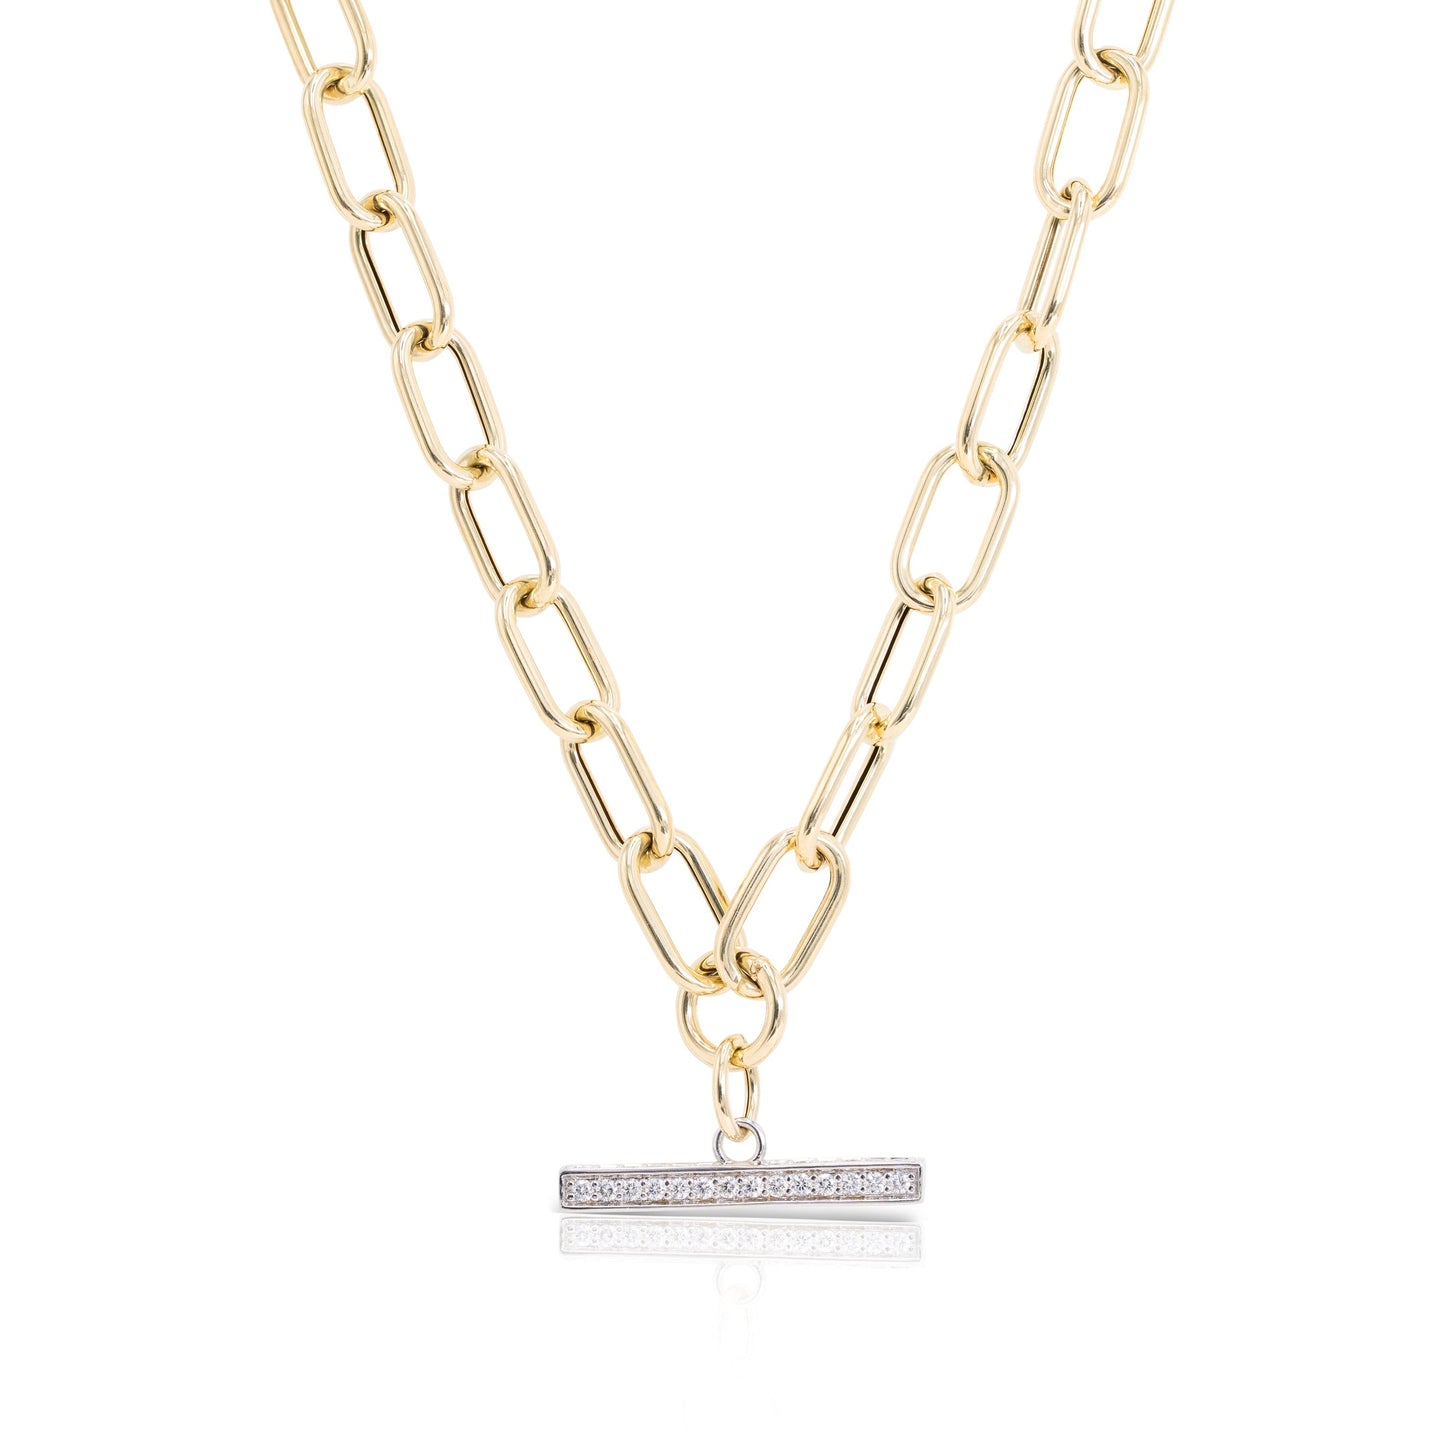 GOLD CHAIN WITH DIAMOND TOGGLE NECKLACE